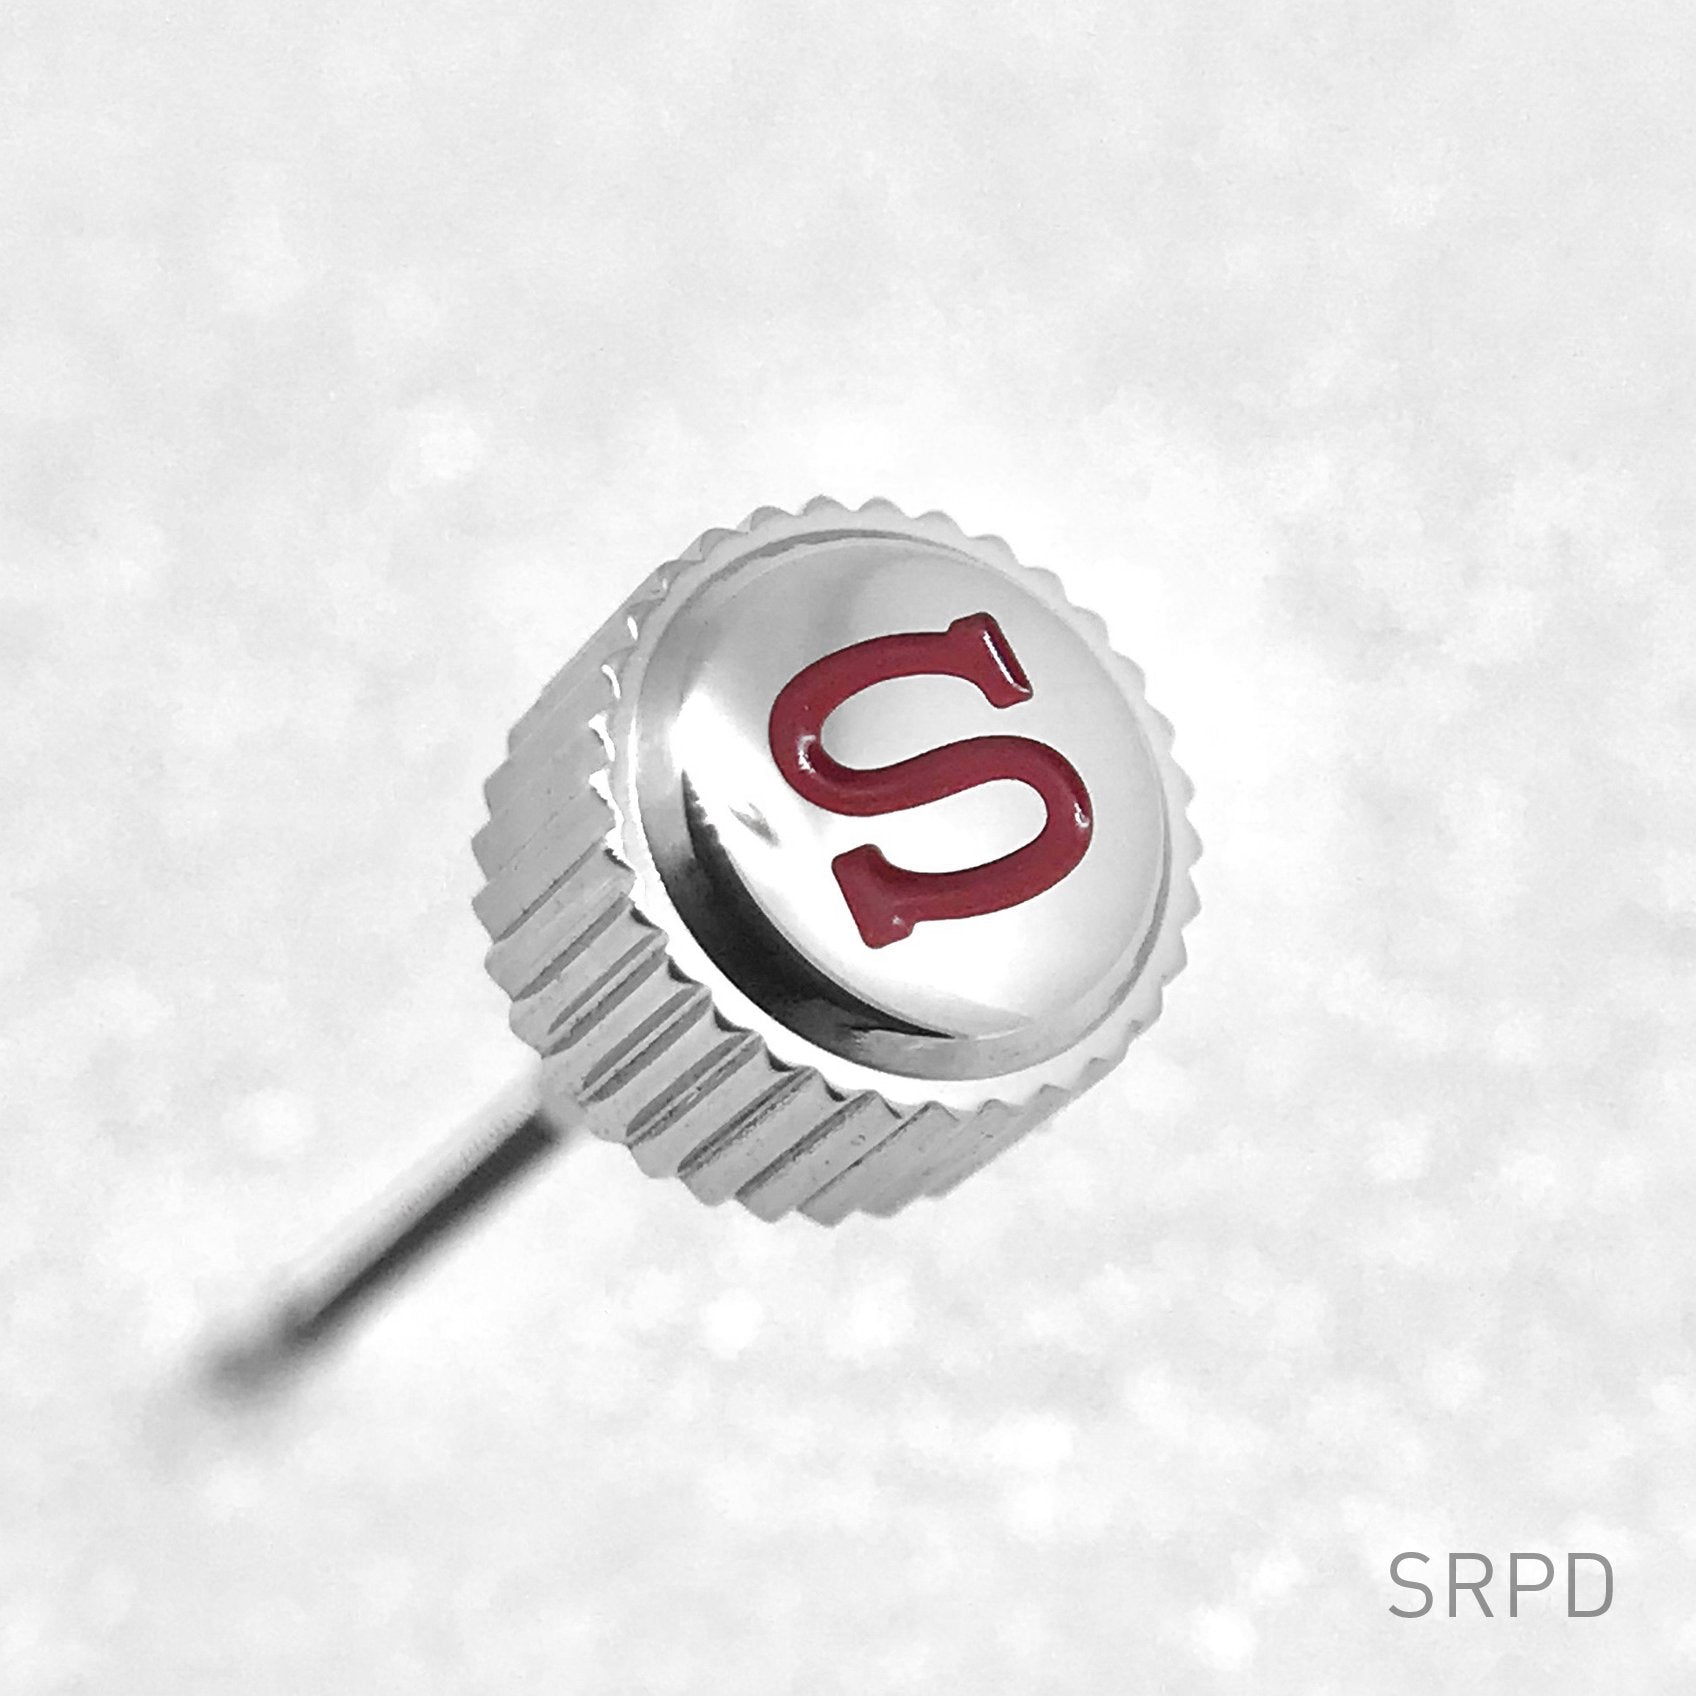 Crown - SRPD - Polished Steel - Red "S"